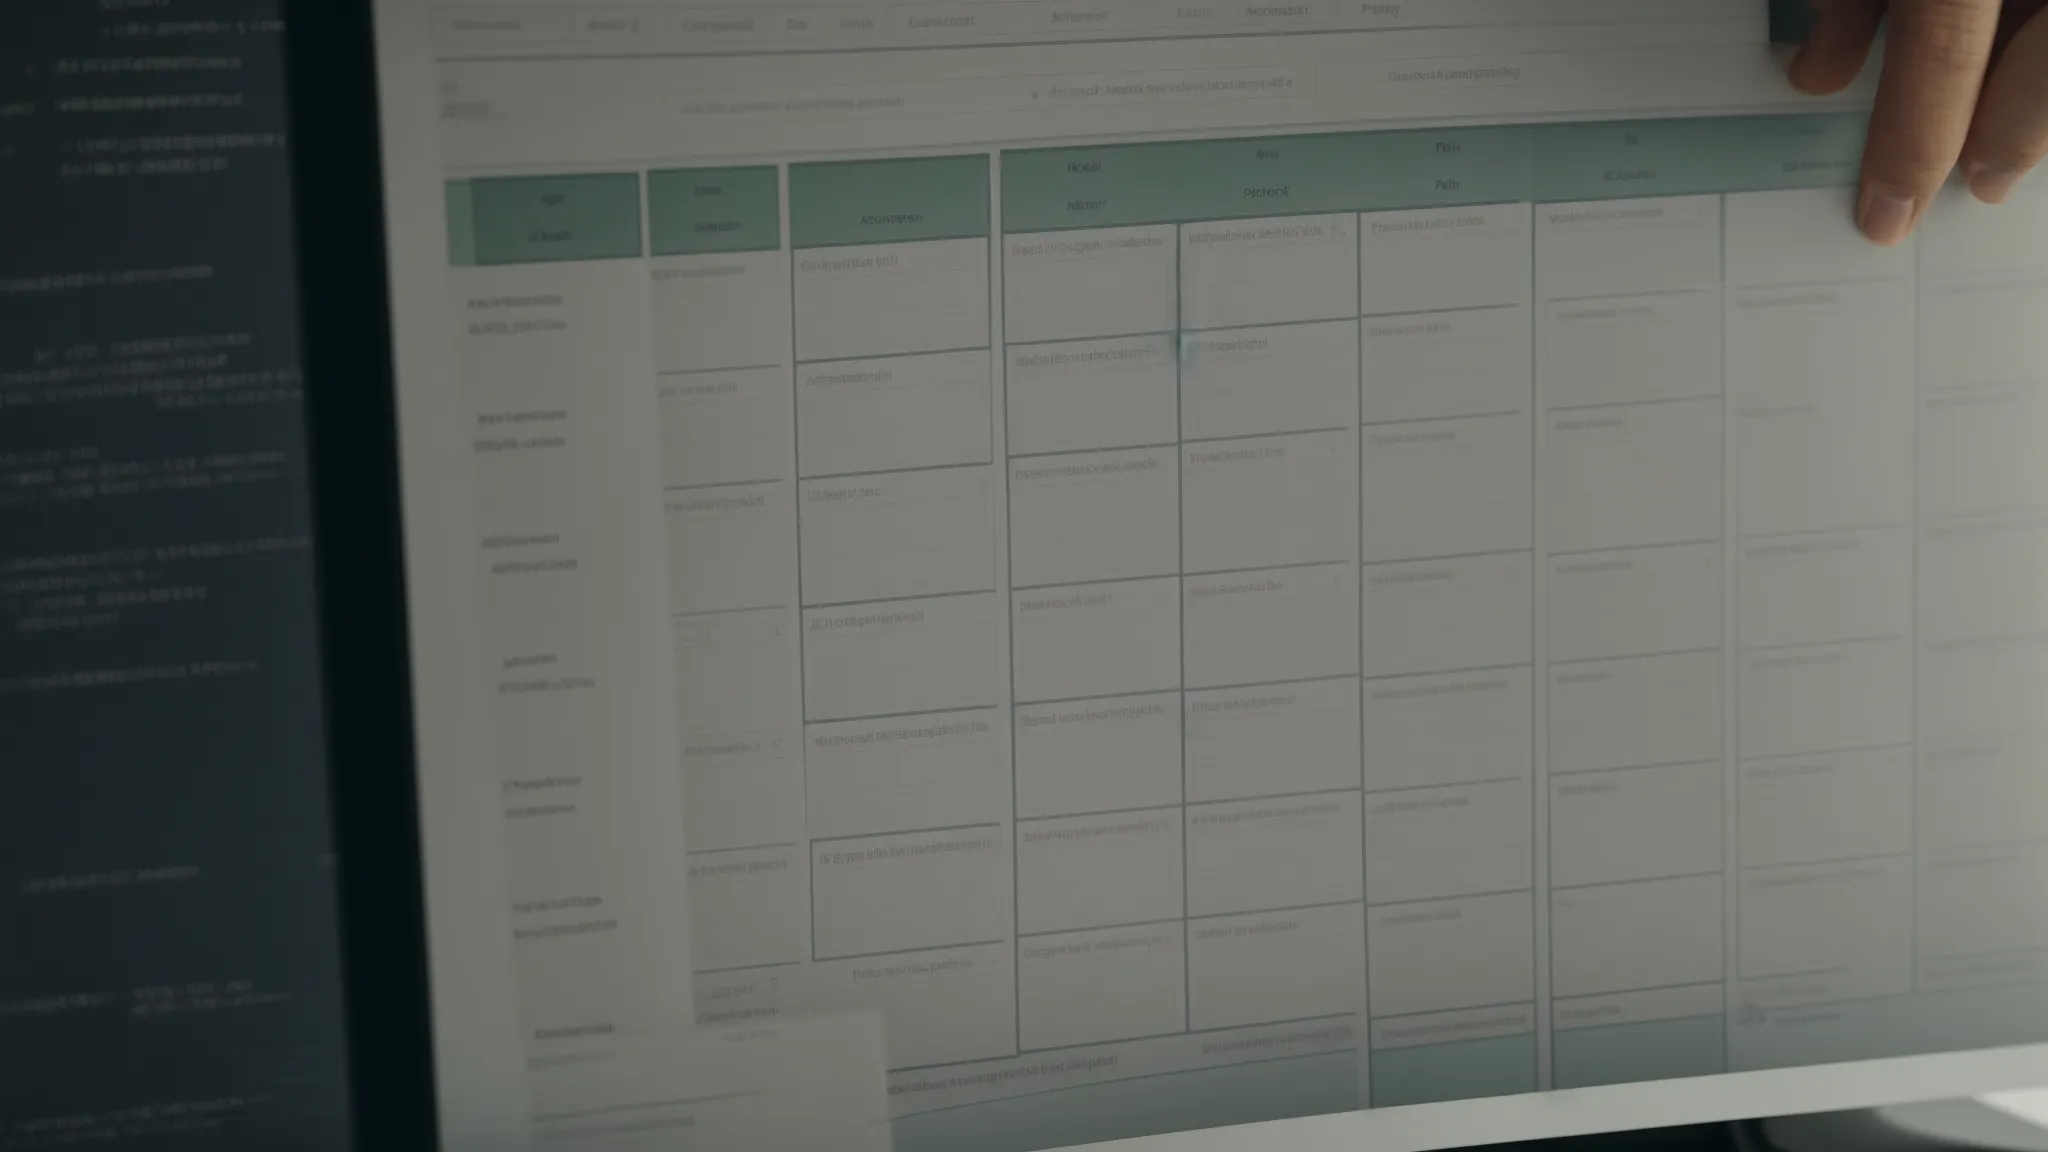 a person analyzing a spreadsheet full of keywords on a computer screen in a minimalist office setup.